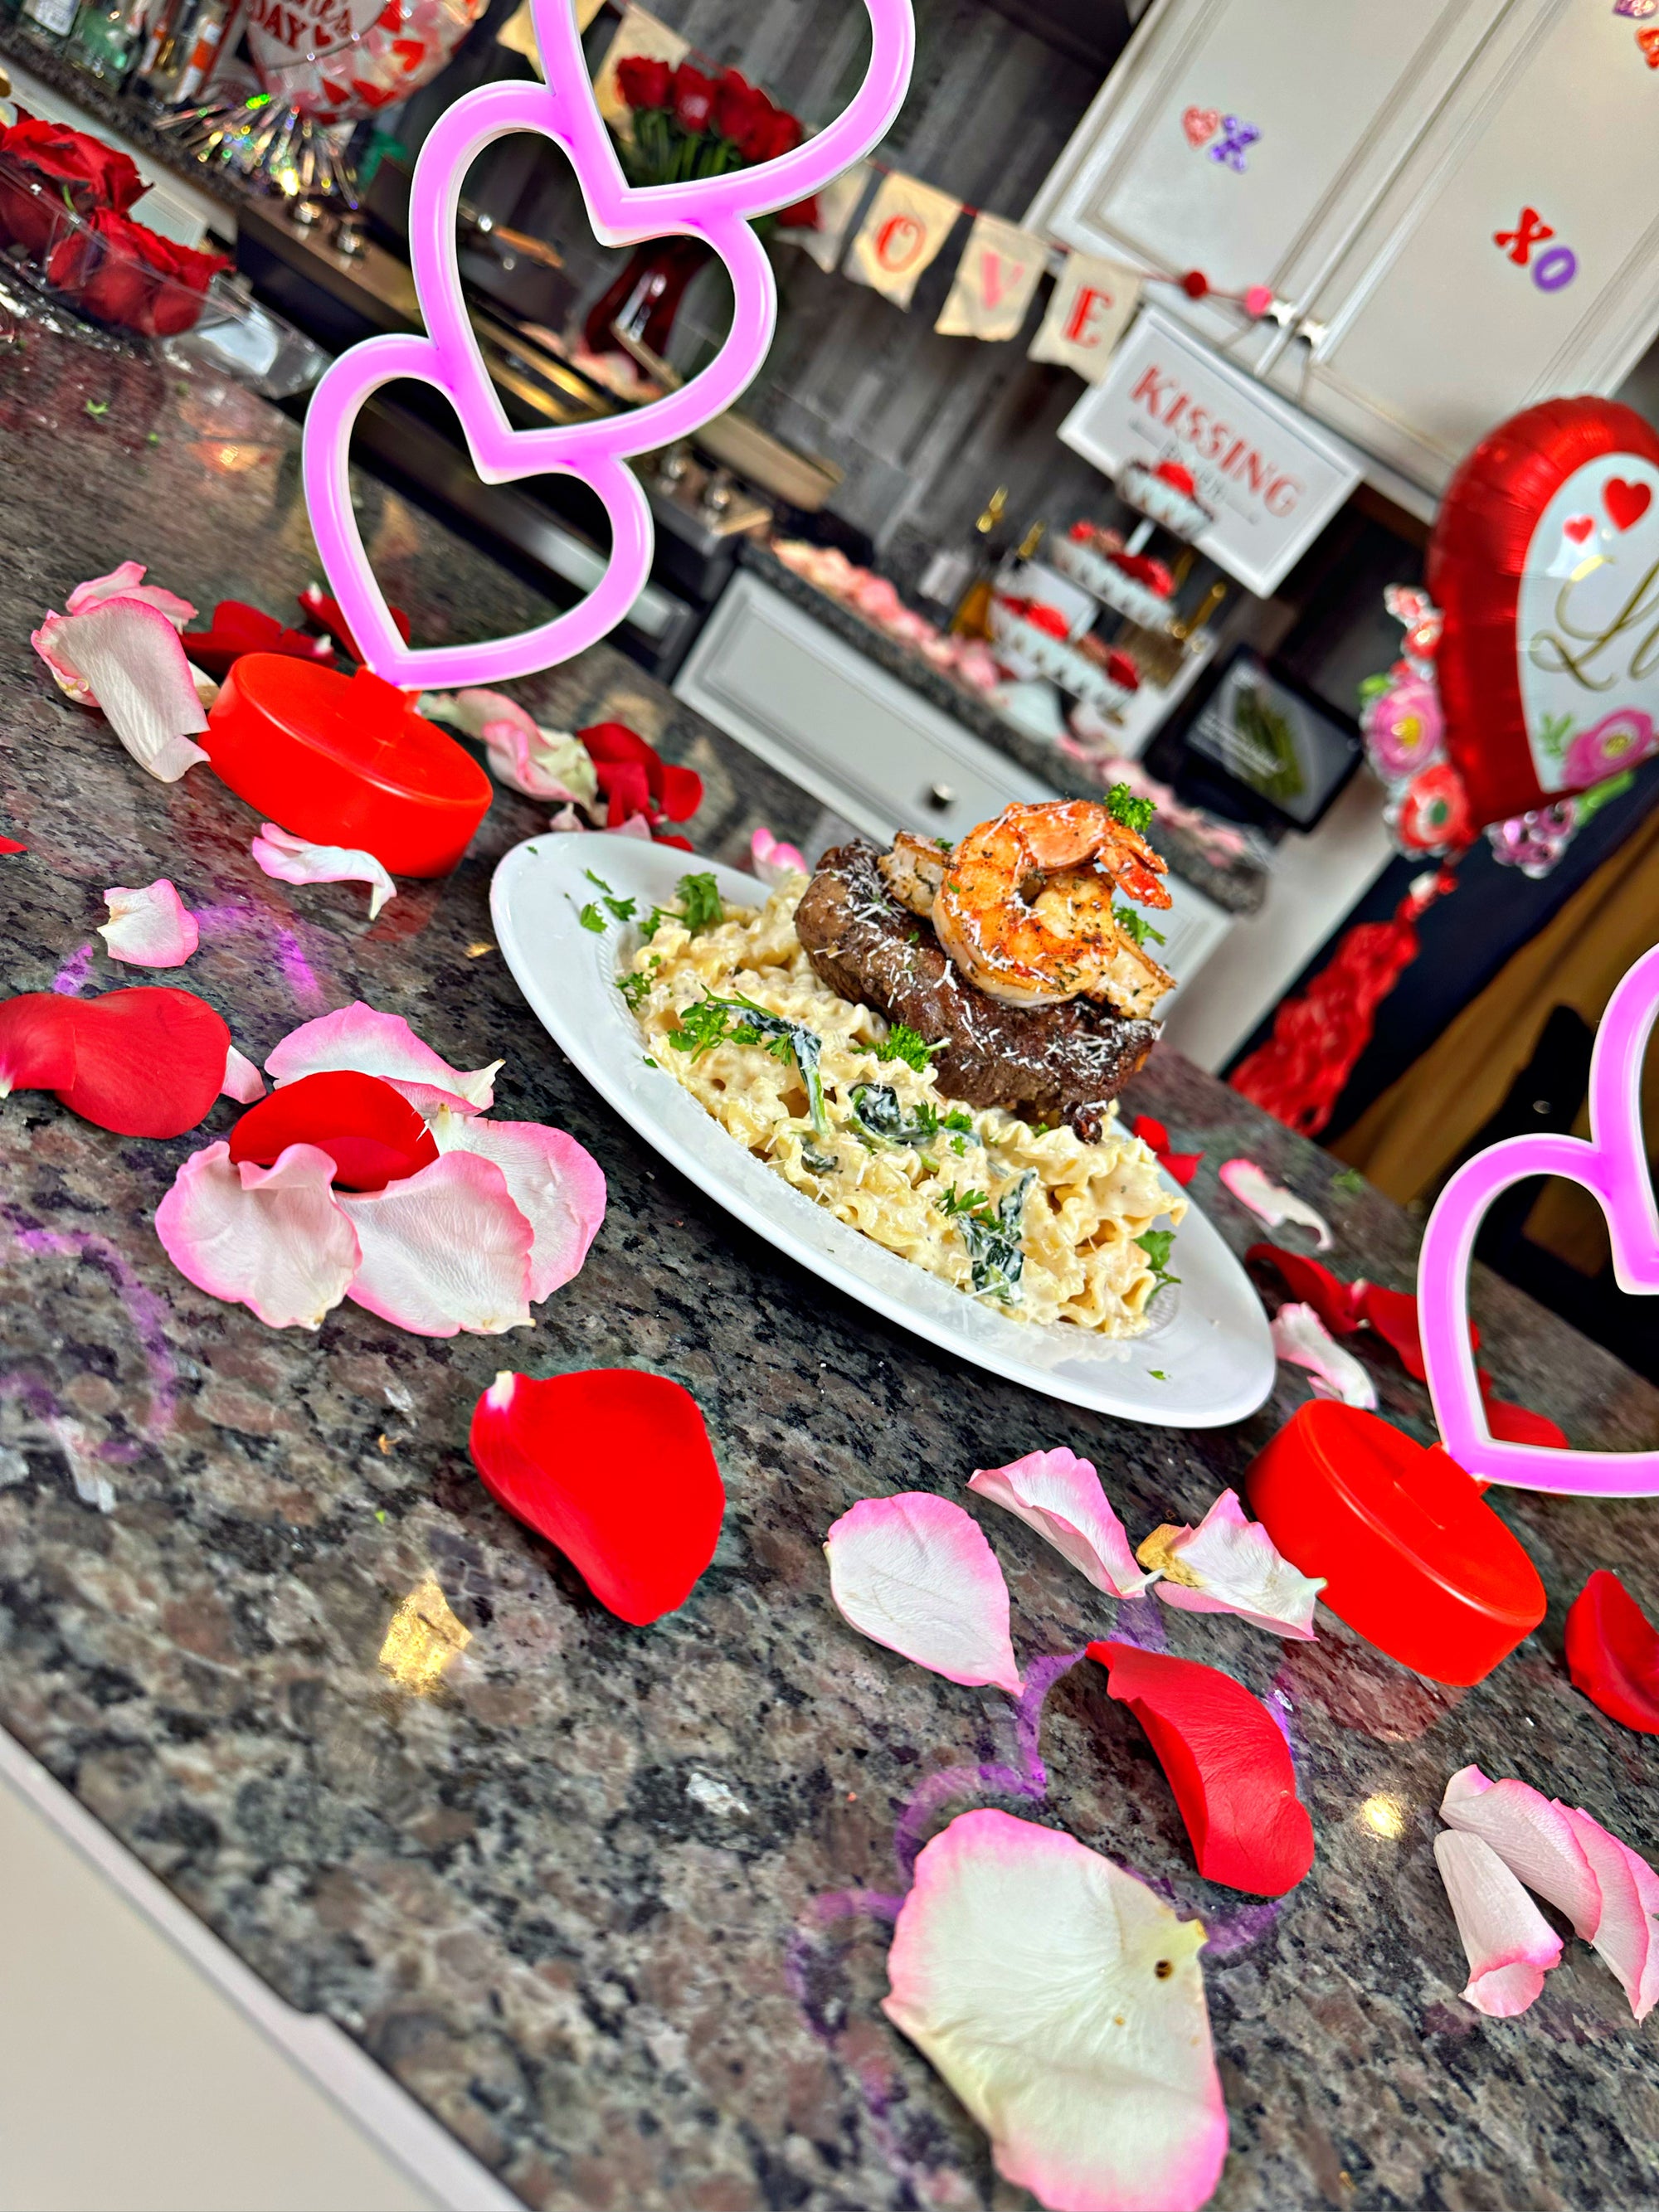 REPLAY Virtual Live Cooking Class - Valentines Day Special